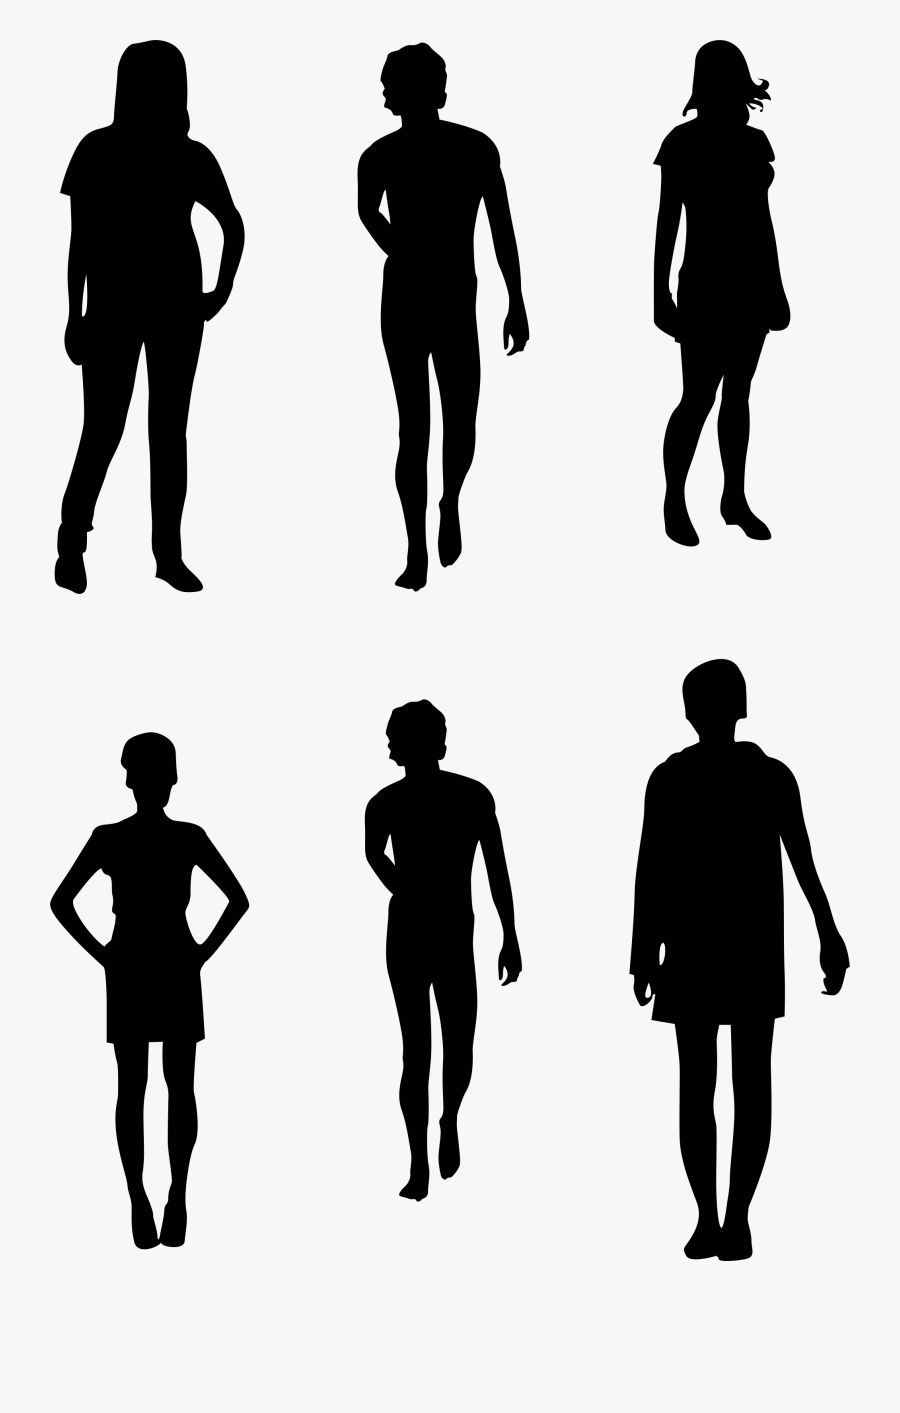 4 Clipart Person Silhouette - Silhouette People For Photoshop, Transparent Clipart